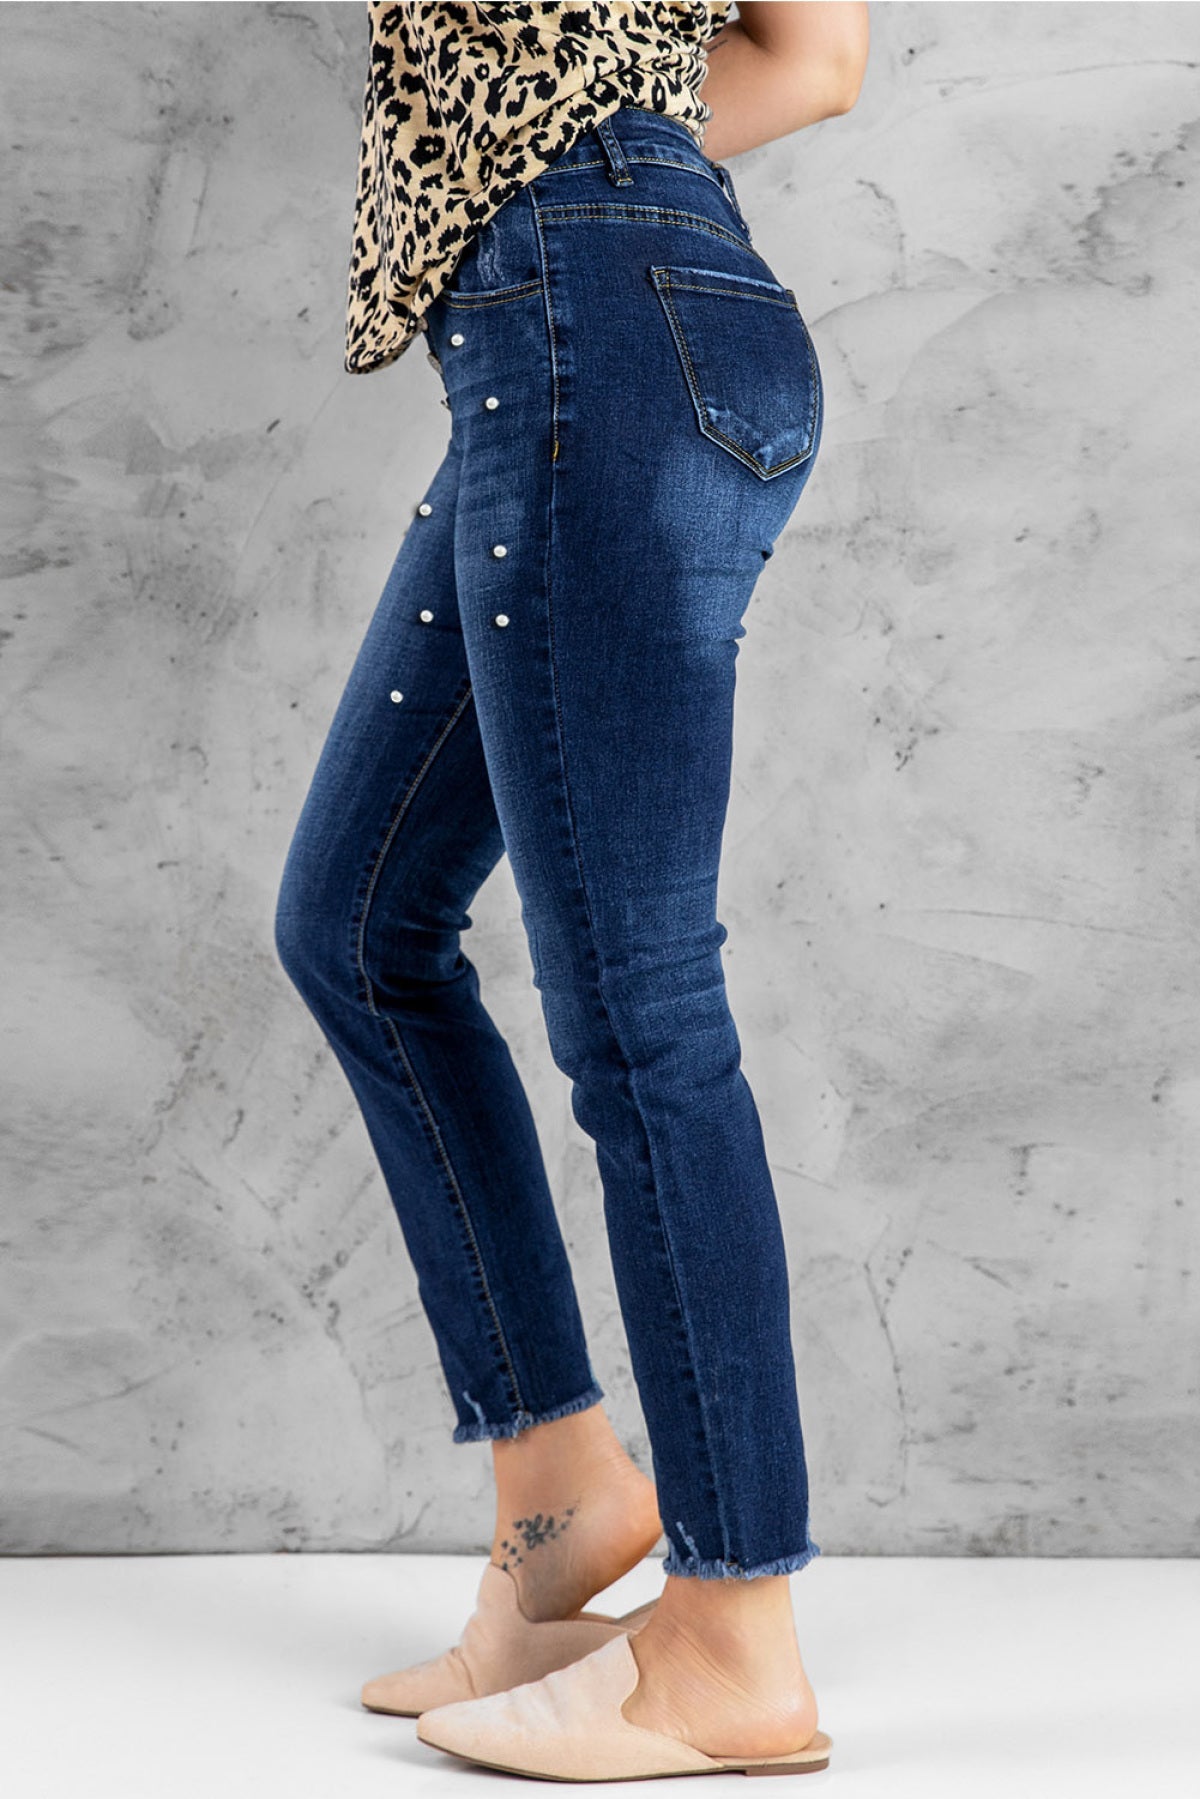 Blue Pearl Beaded Button Fly Distressed Skinny Jeans